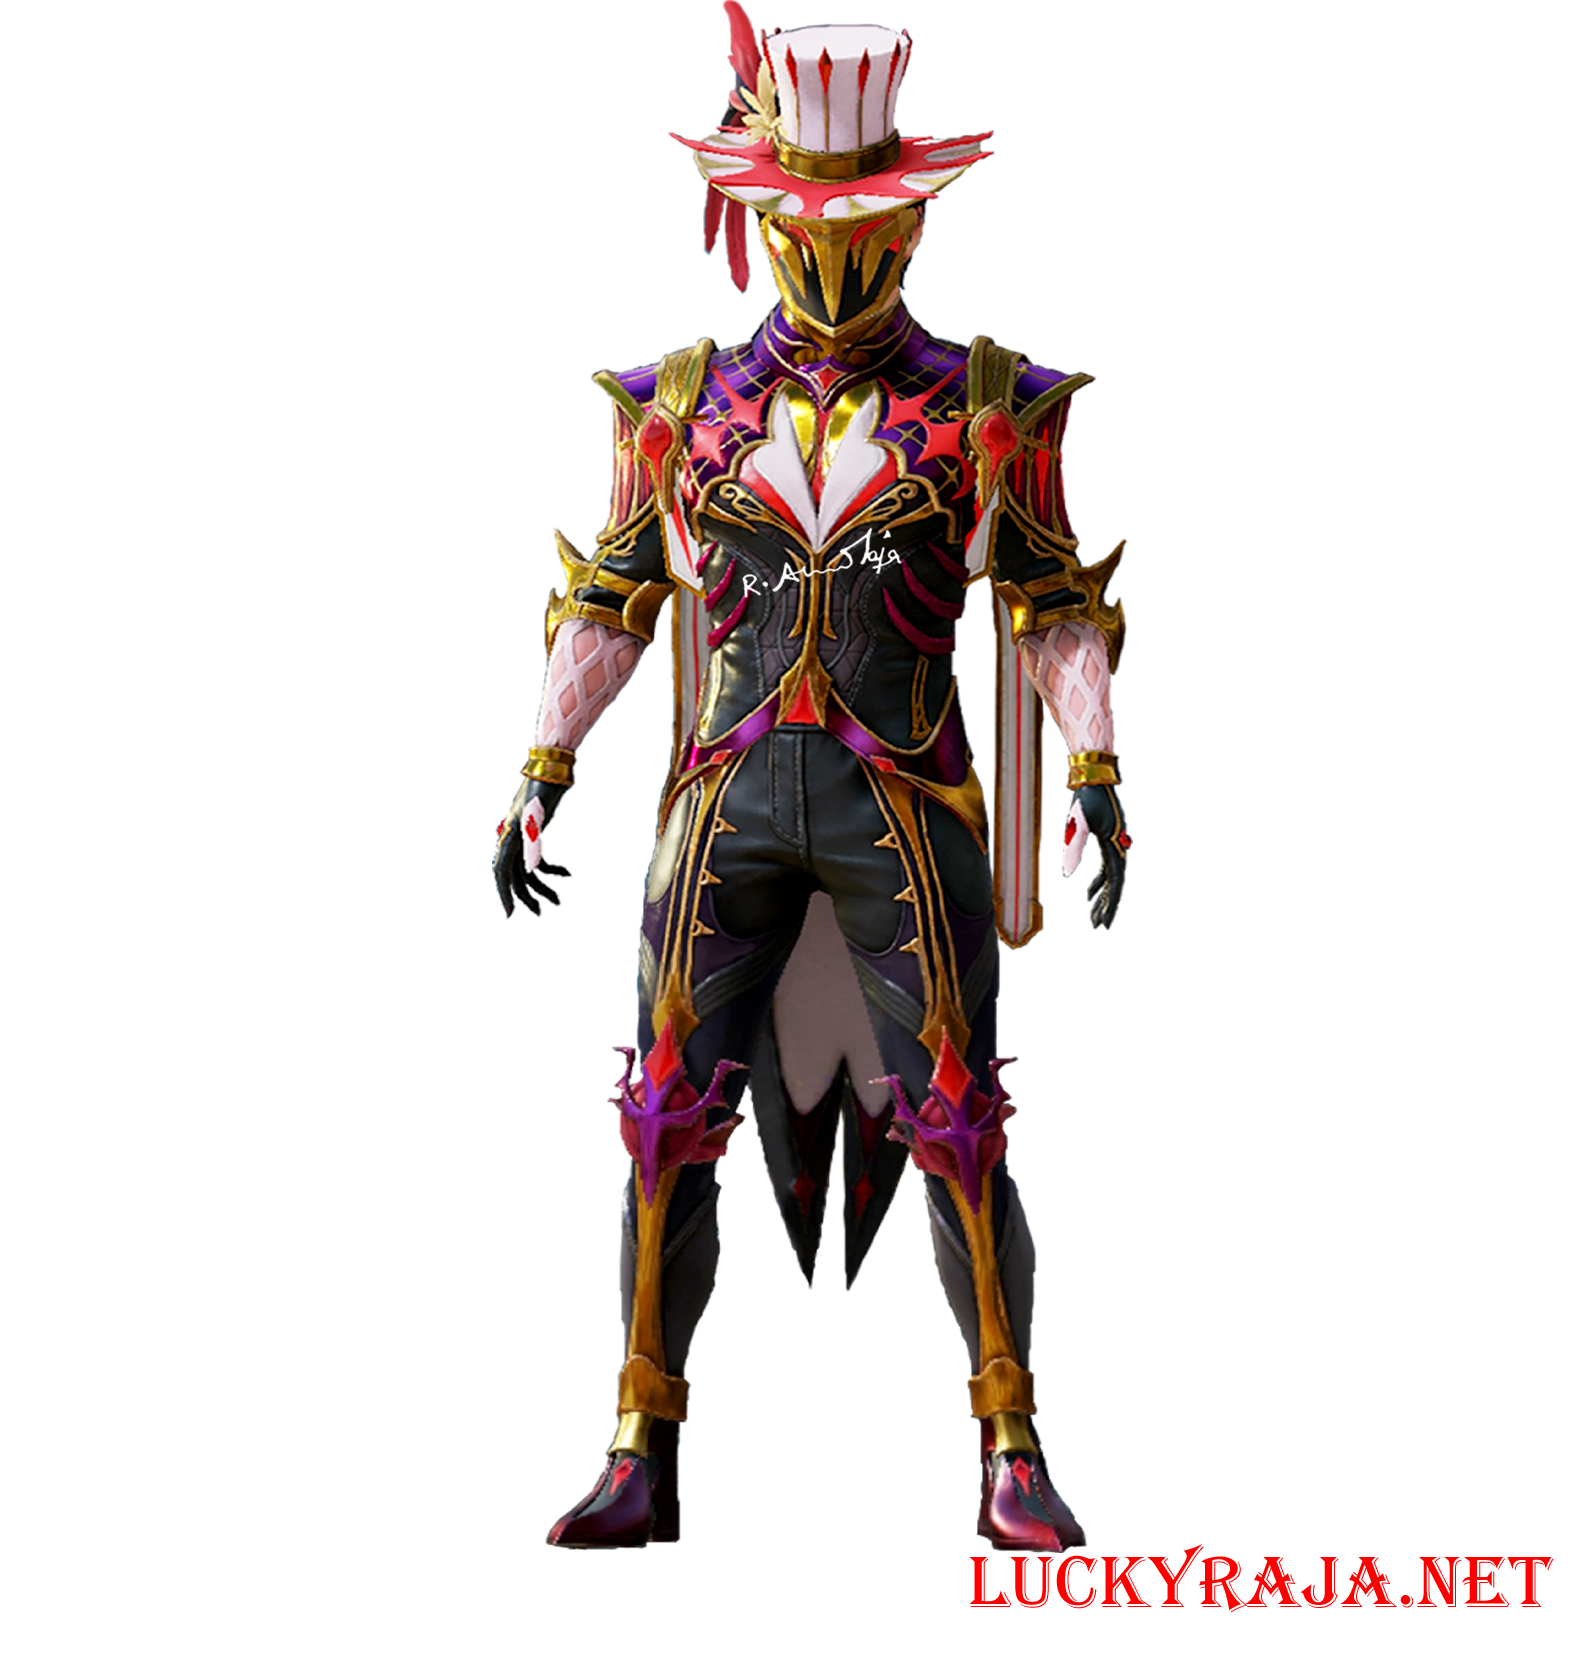 Sanguine Nightmare,Sanguine Nightmare set,Sanguine Nightmare images,c3s9 m18 RP 50 outfit pubg mobile,mythic outfit,Sanguine Nightmare outfit,pubg mobile outfits,animation,cartoon images